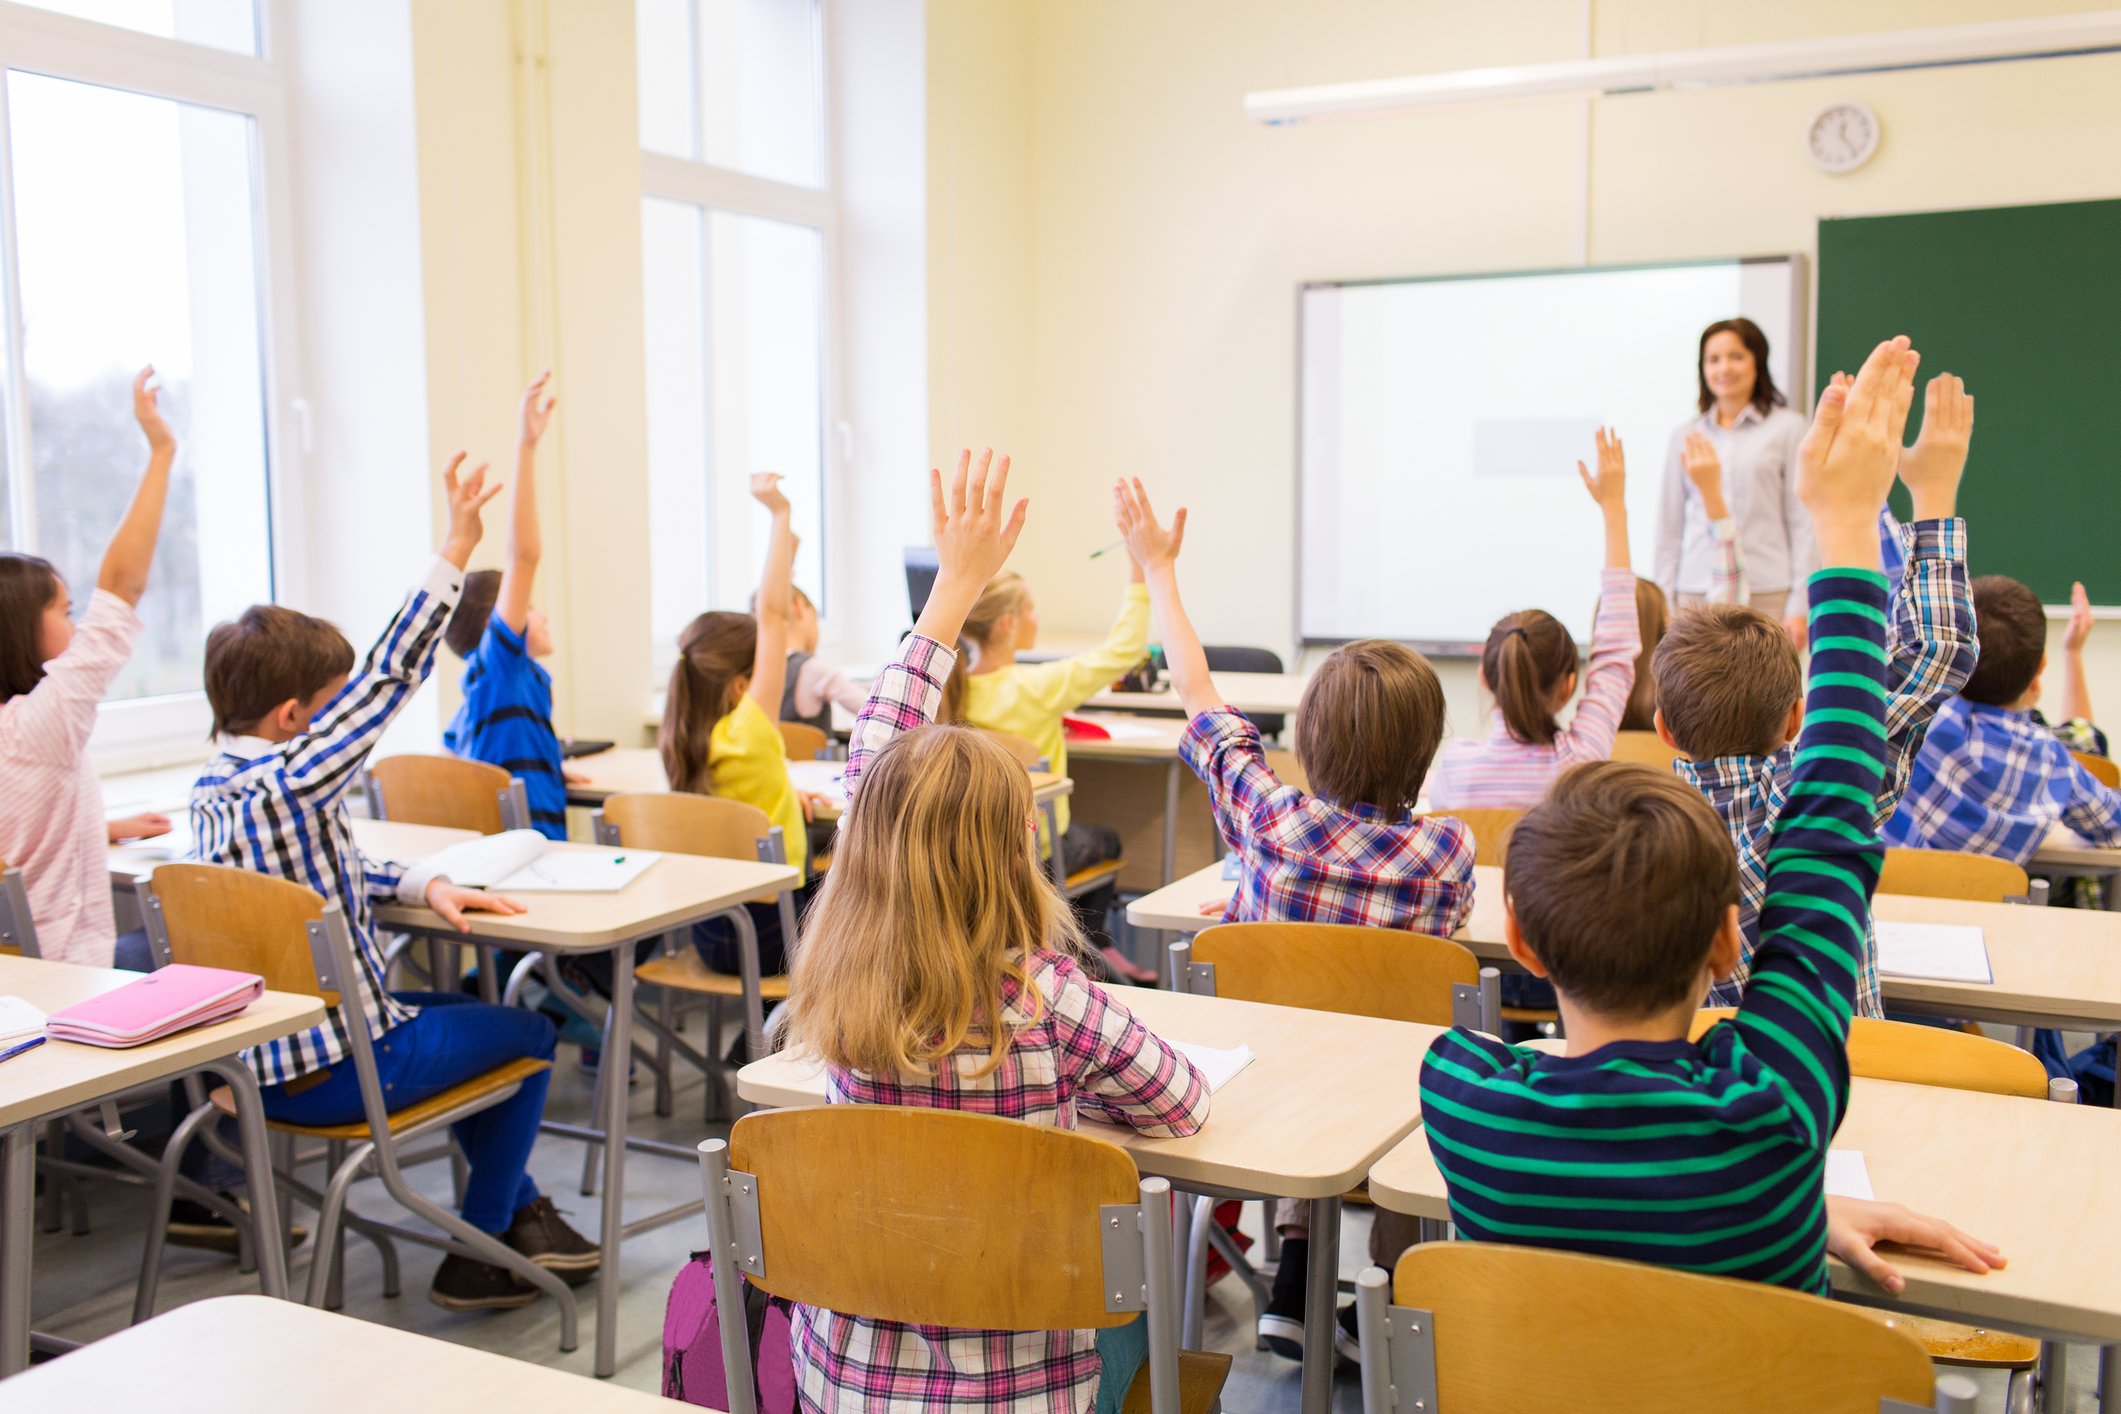 © Syda Productions | Dreamstime.com - Group of school kids raising hands in classroom